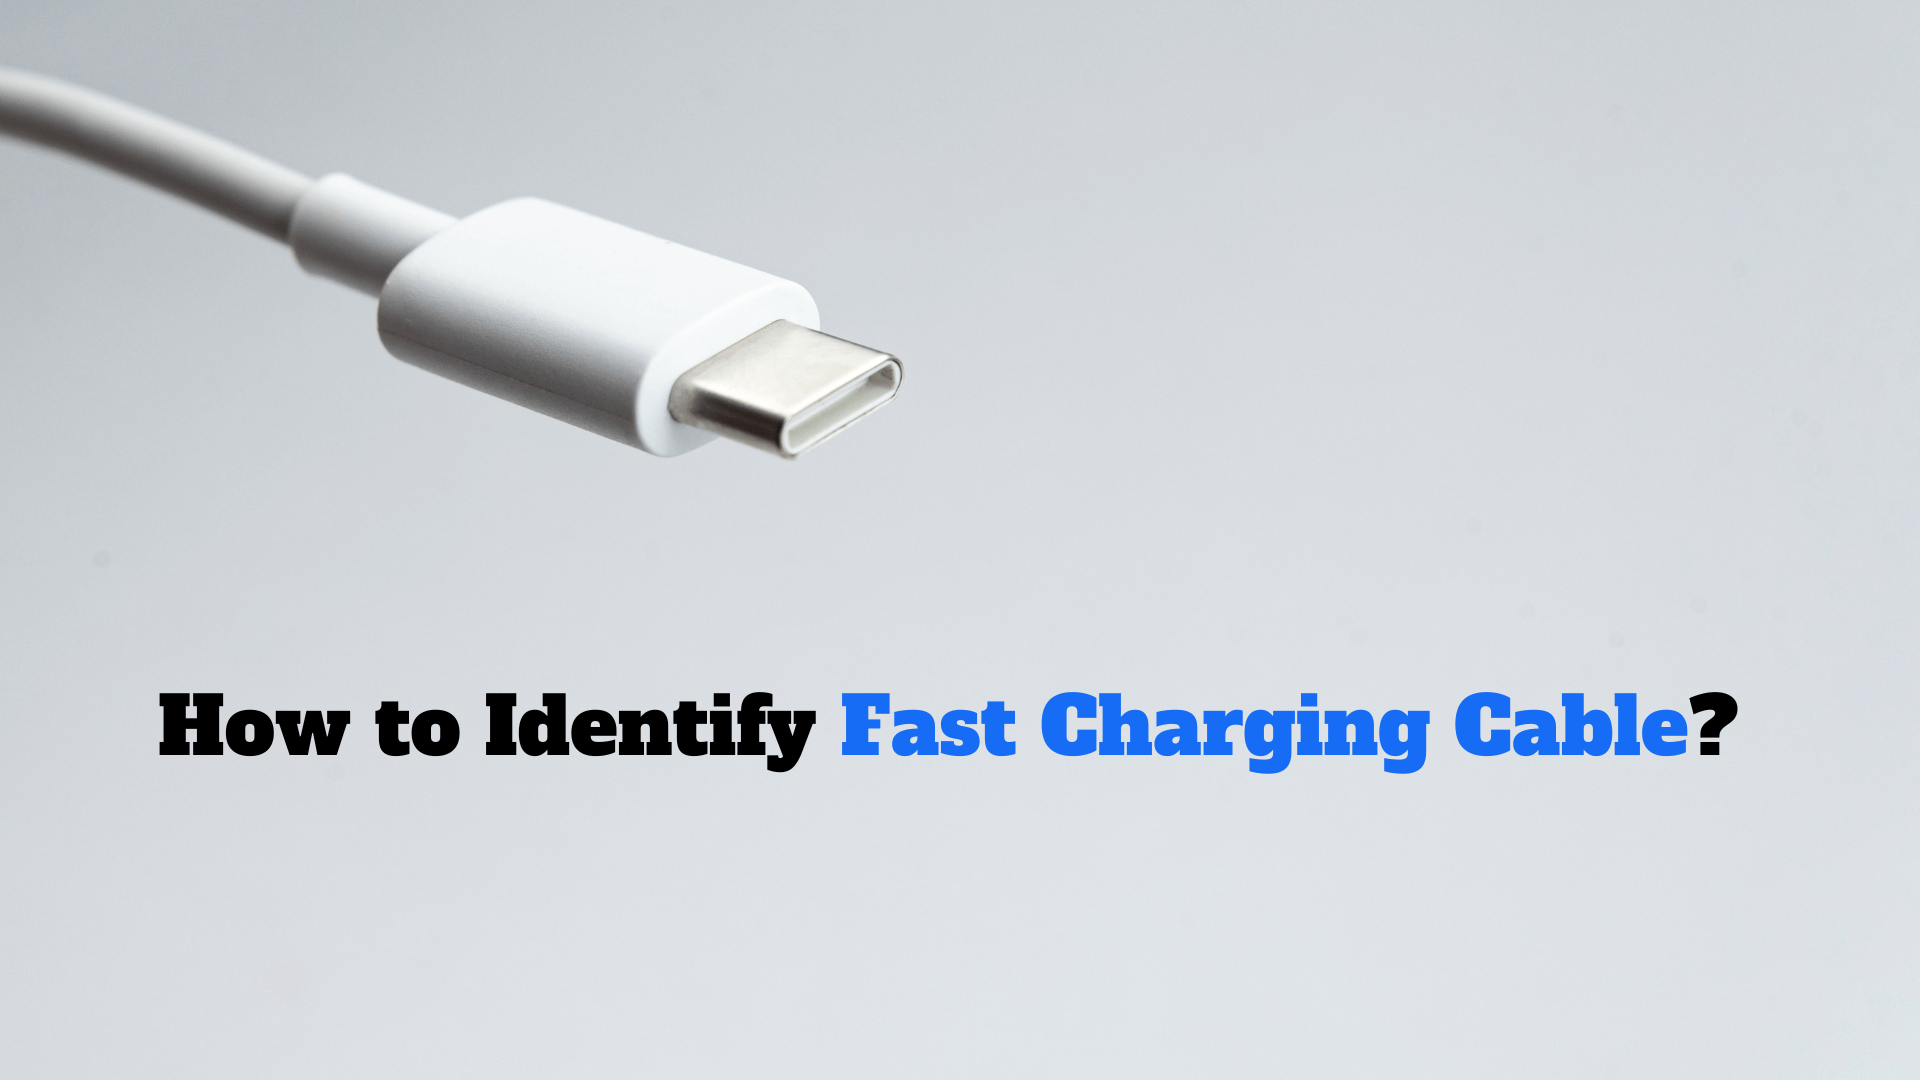 How to Identify Fast Charging Cable